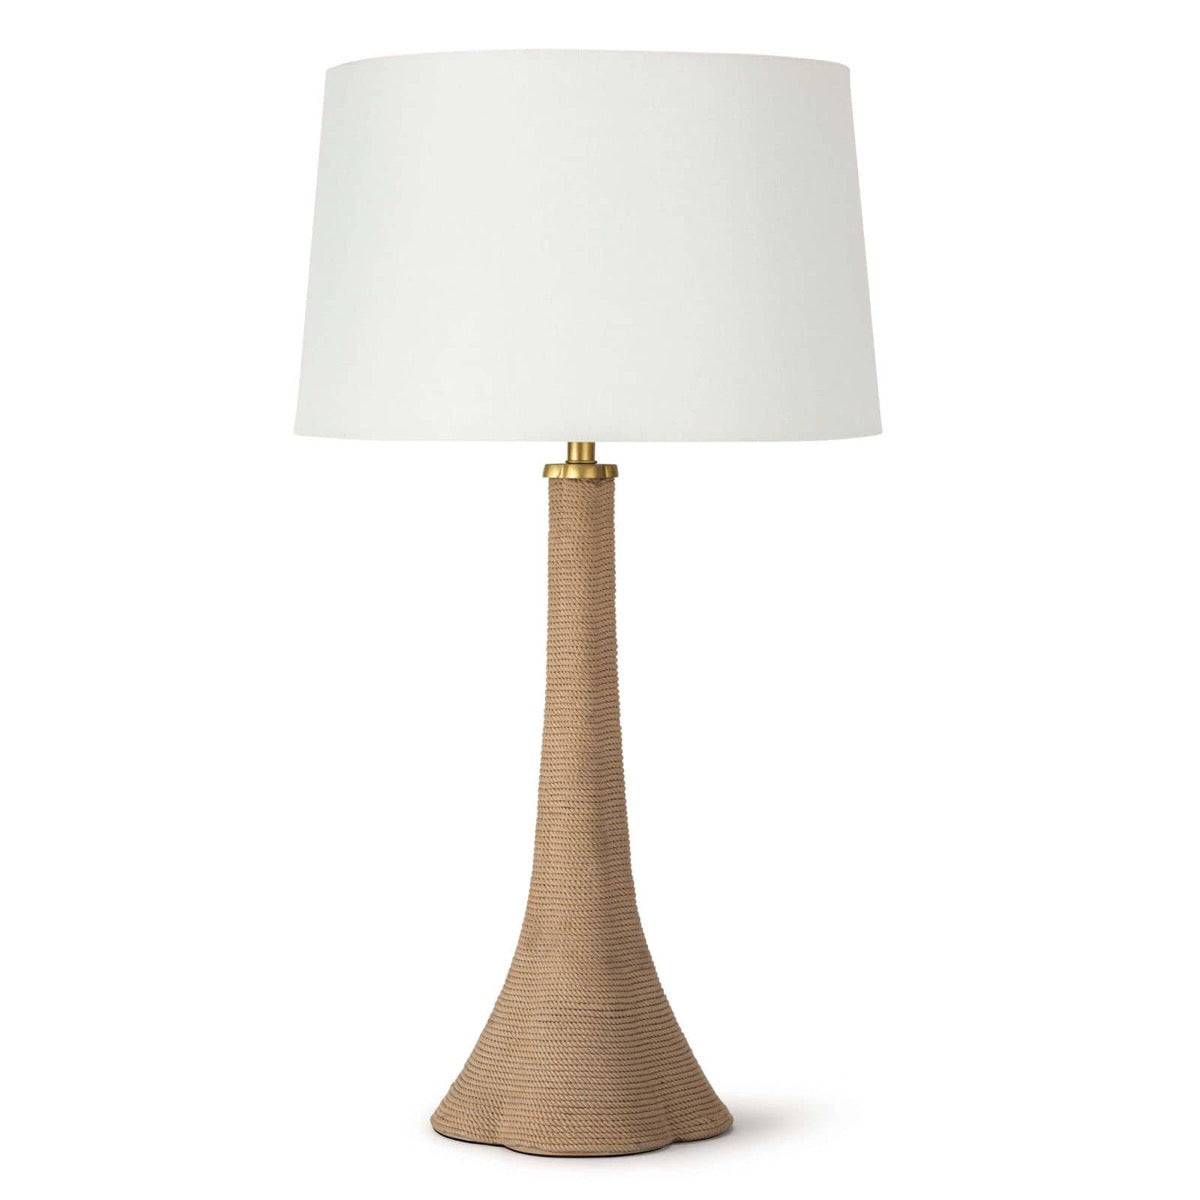 Eleanor Table Lamp. Front view.